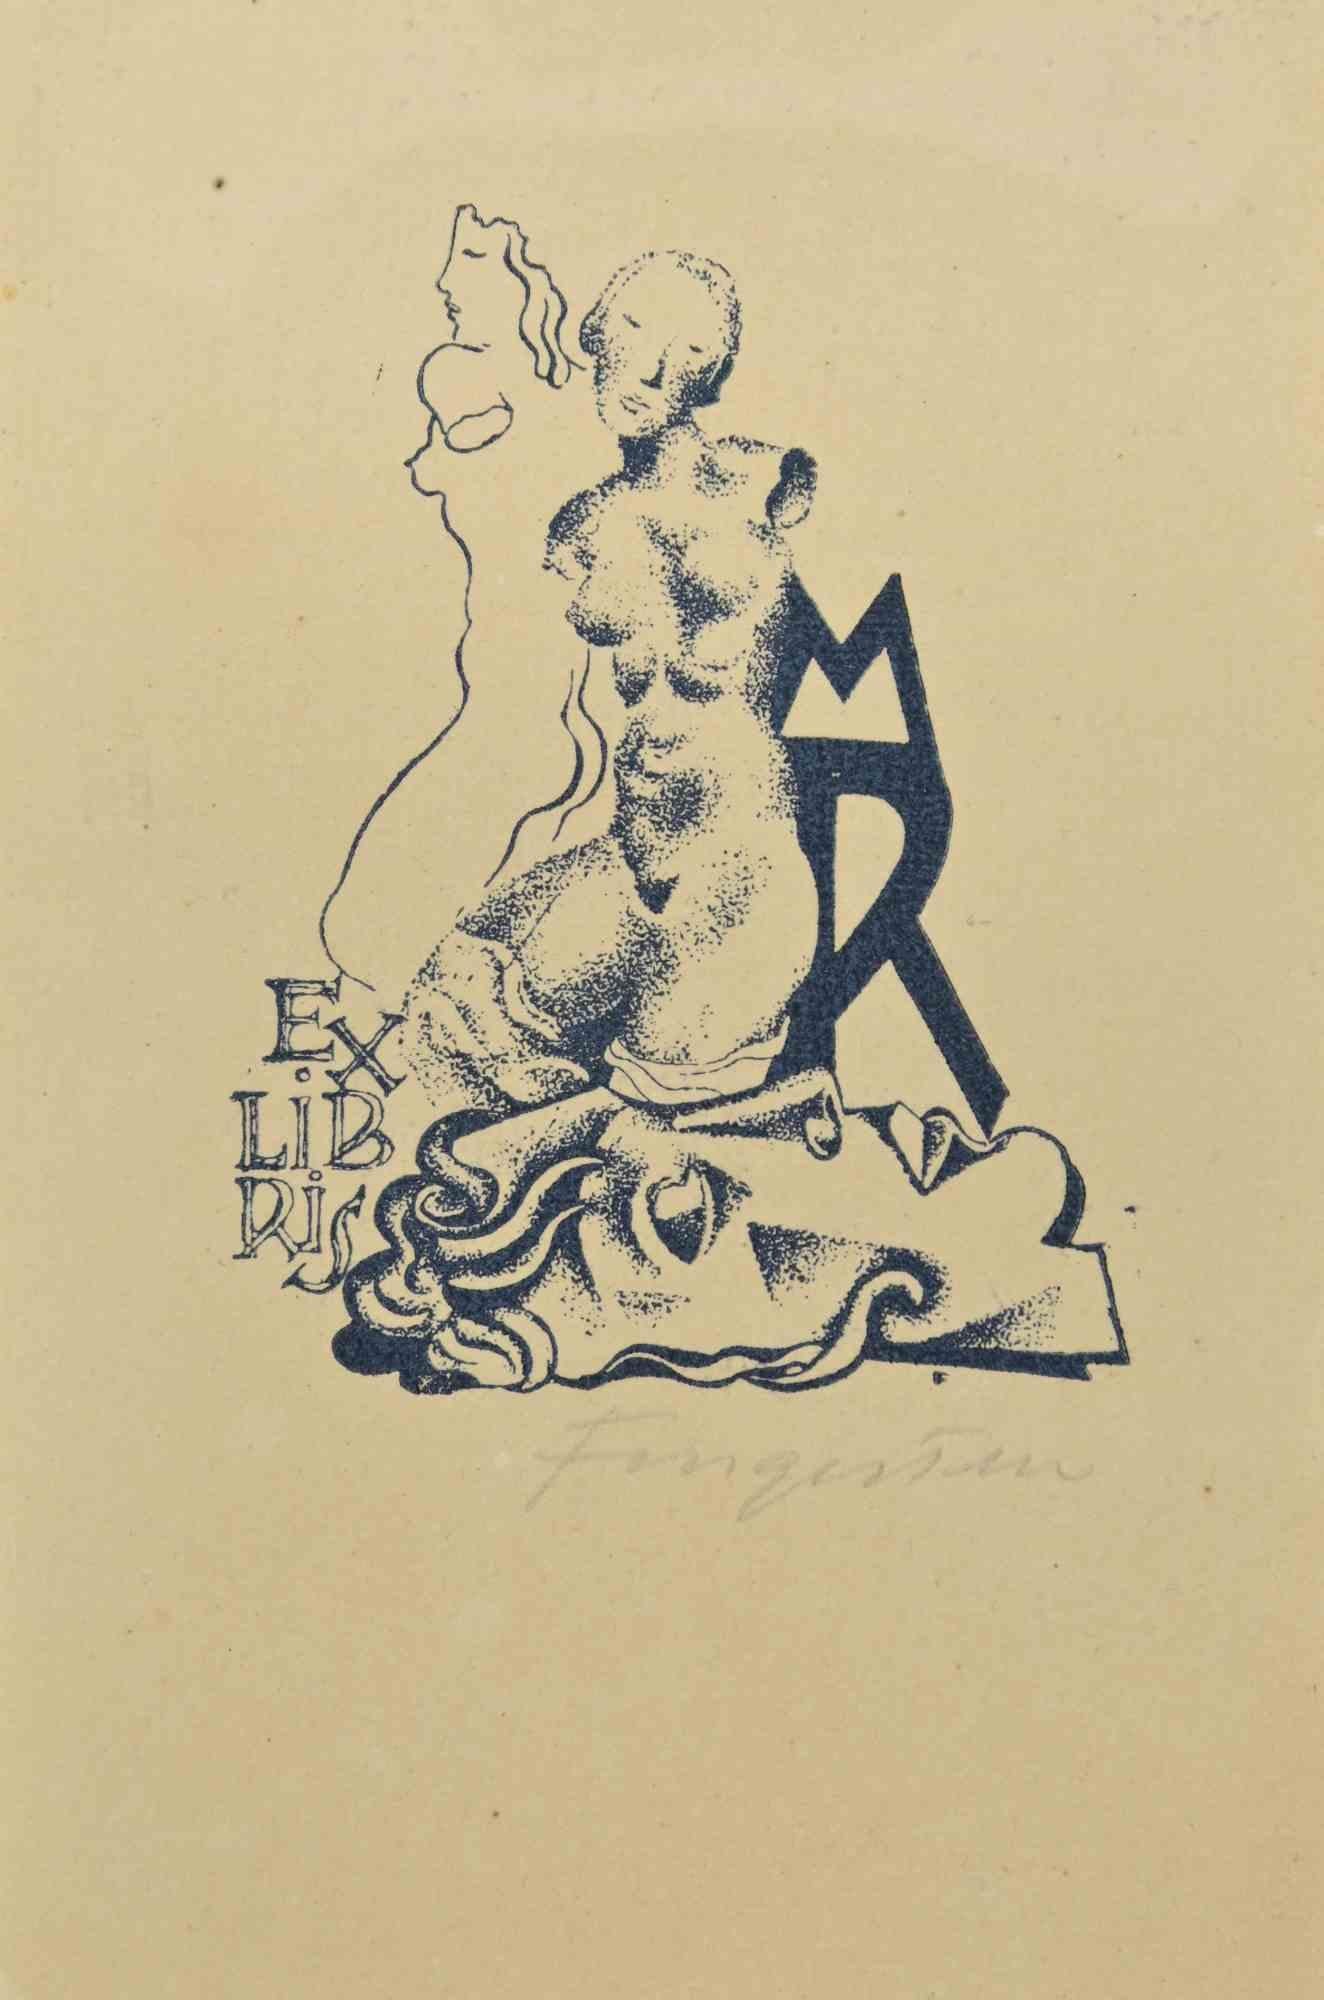 Ex Libris M.R. is a Woodcut print created by  Michel Fingesten.

Hand Signed on the lower right margin.

Very Good condition.

Michel Fingesten (1884 - 1943) was a Czech painter and engraver of Jewish origin. He is considered one of the greatest Ex